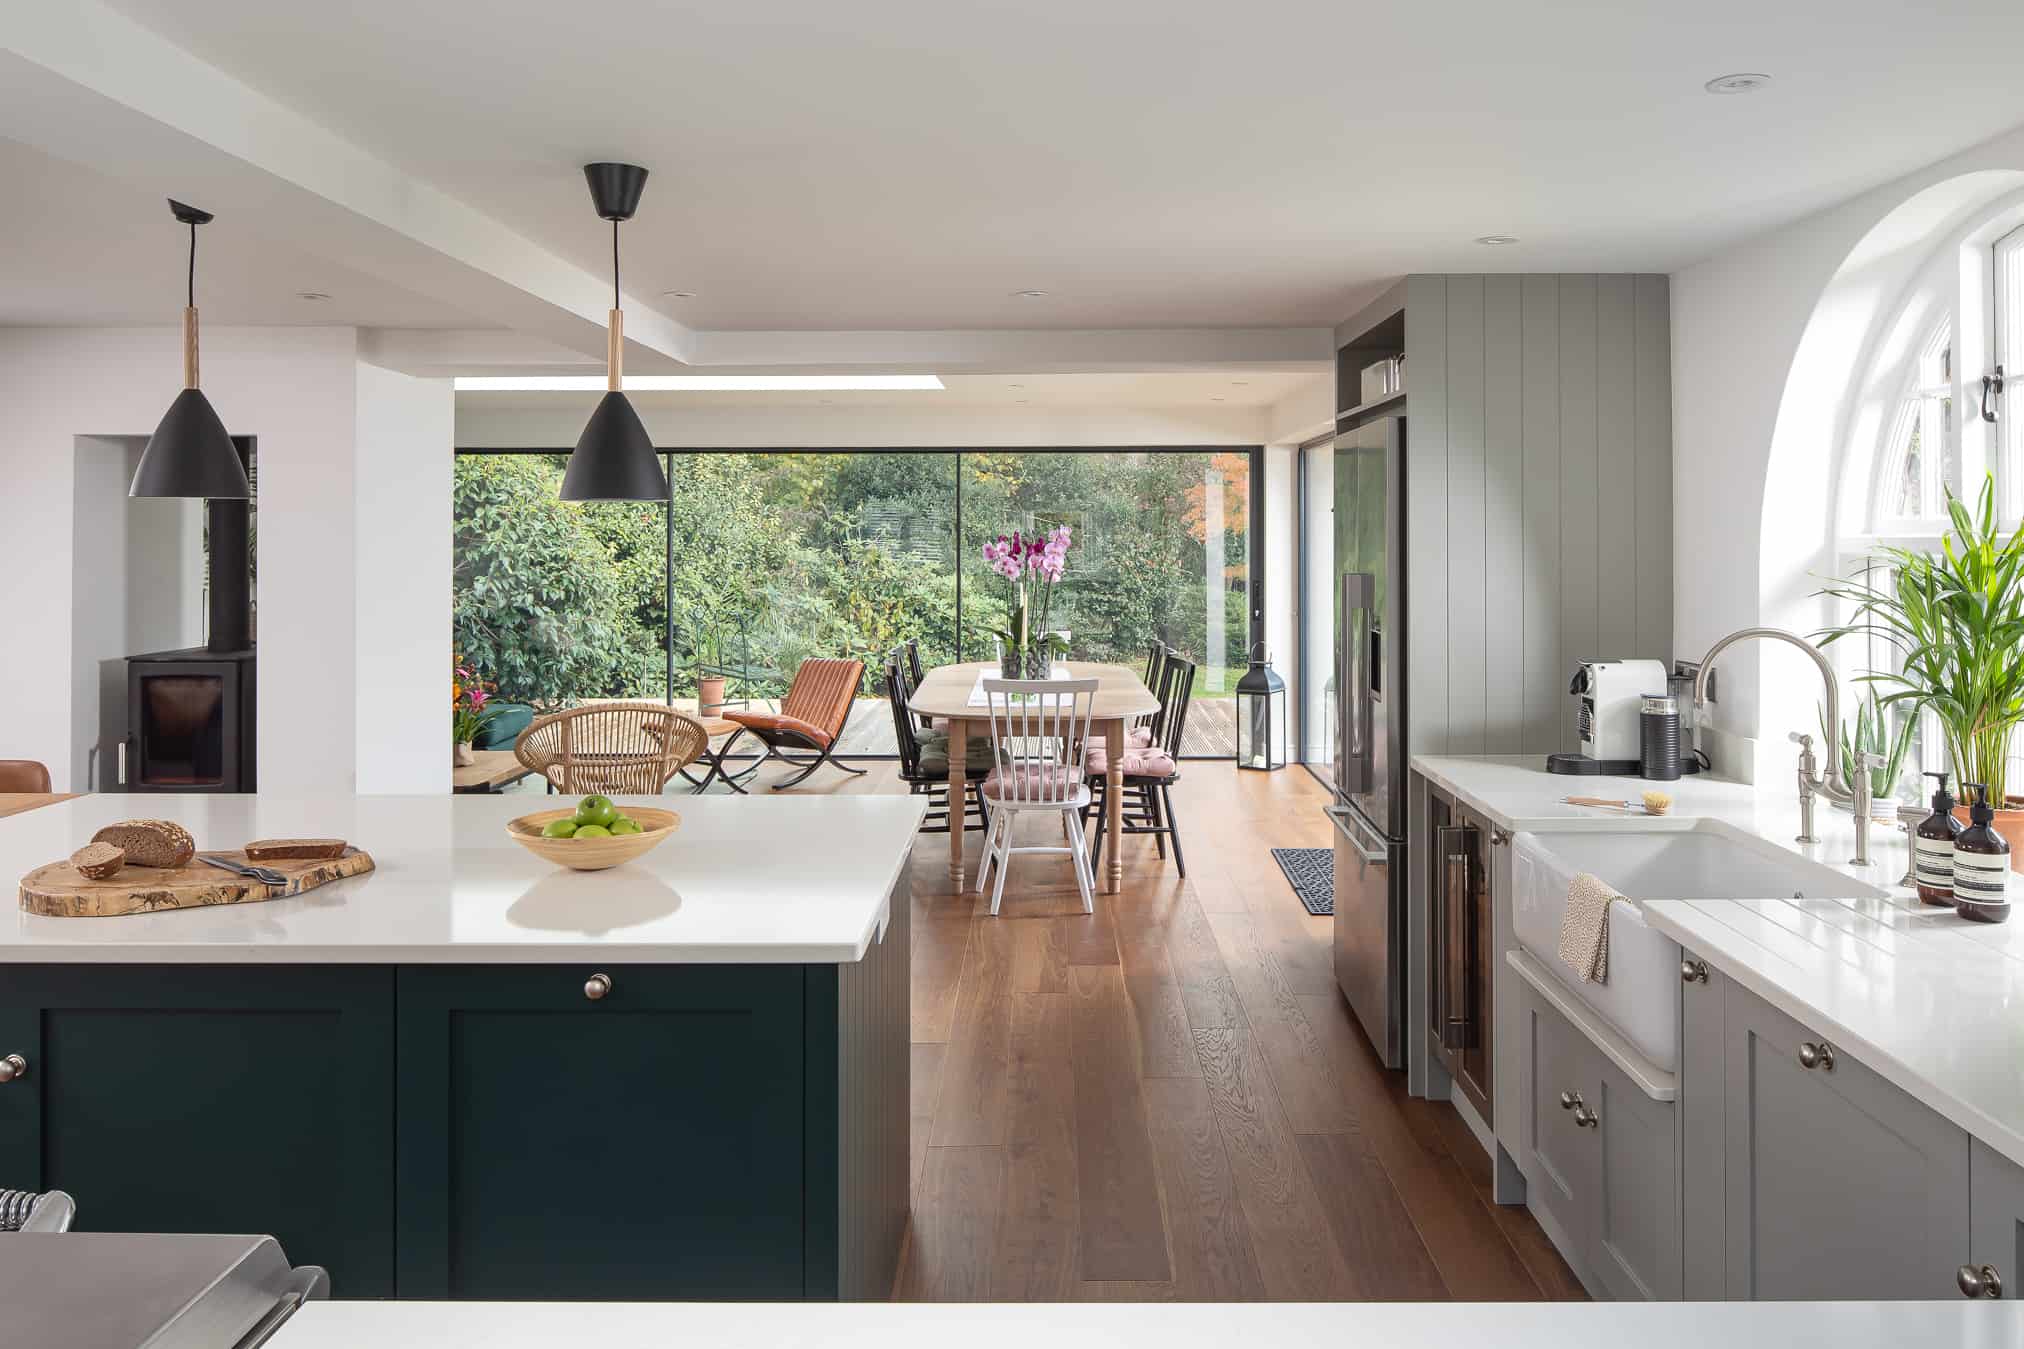 Creating An Open Plan Kitchen For Your Home   John Lewis of Hungerford